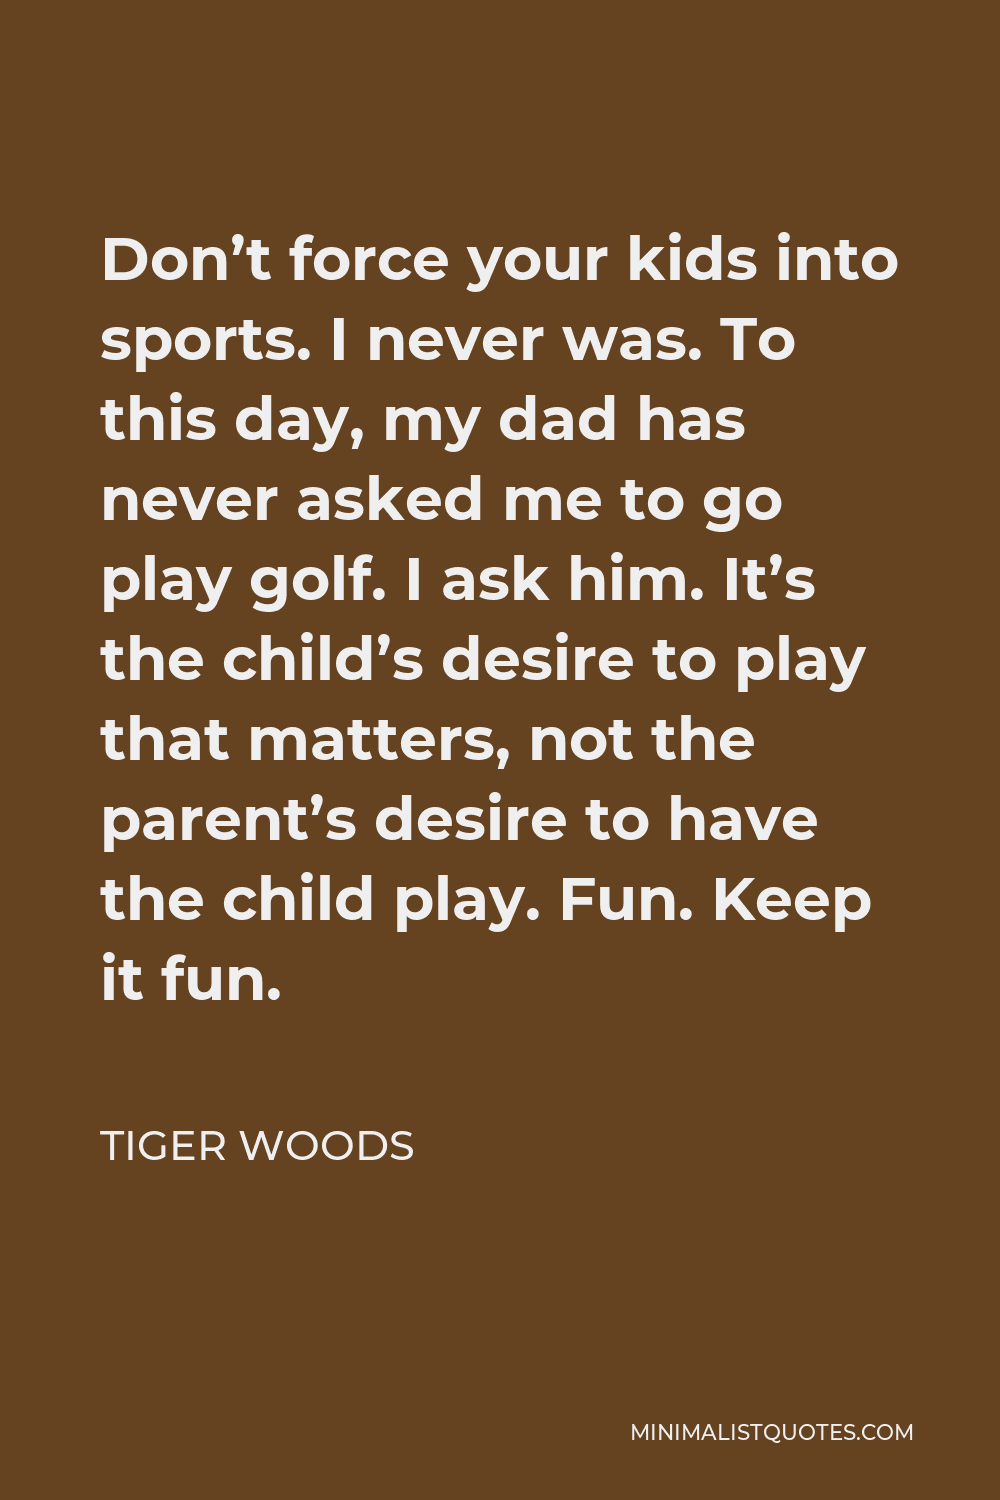 Tiger Woods Quote - Don’t force your kids into sports. I never was. To this day, my dad has never asked me to go play golf. I ask him. It’s the child’s desire to play that matters, not the parent’s desire to have the child play. Fun. Keep it fun.